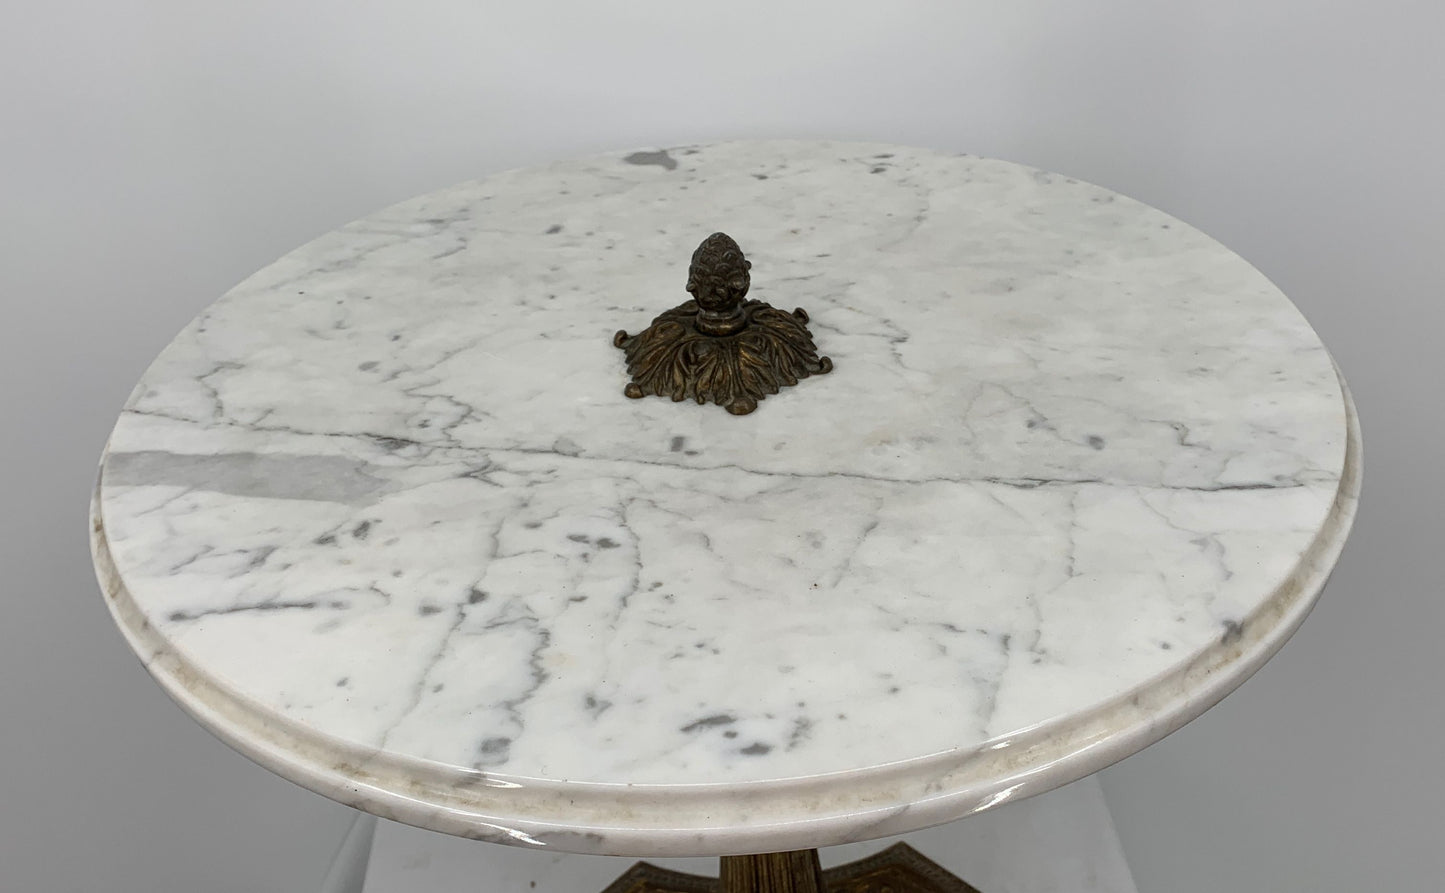 Vintage Italian Marble Top Bronze Stand Side Table 18" Tall